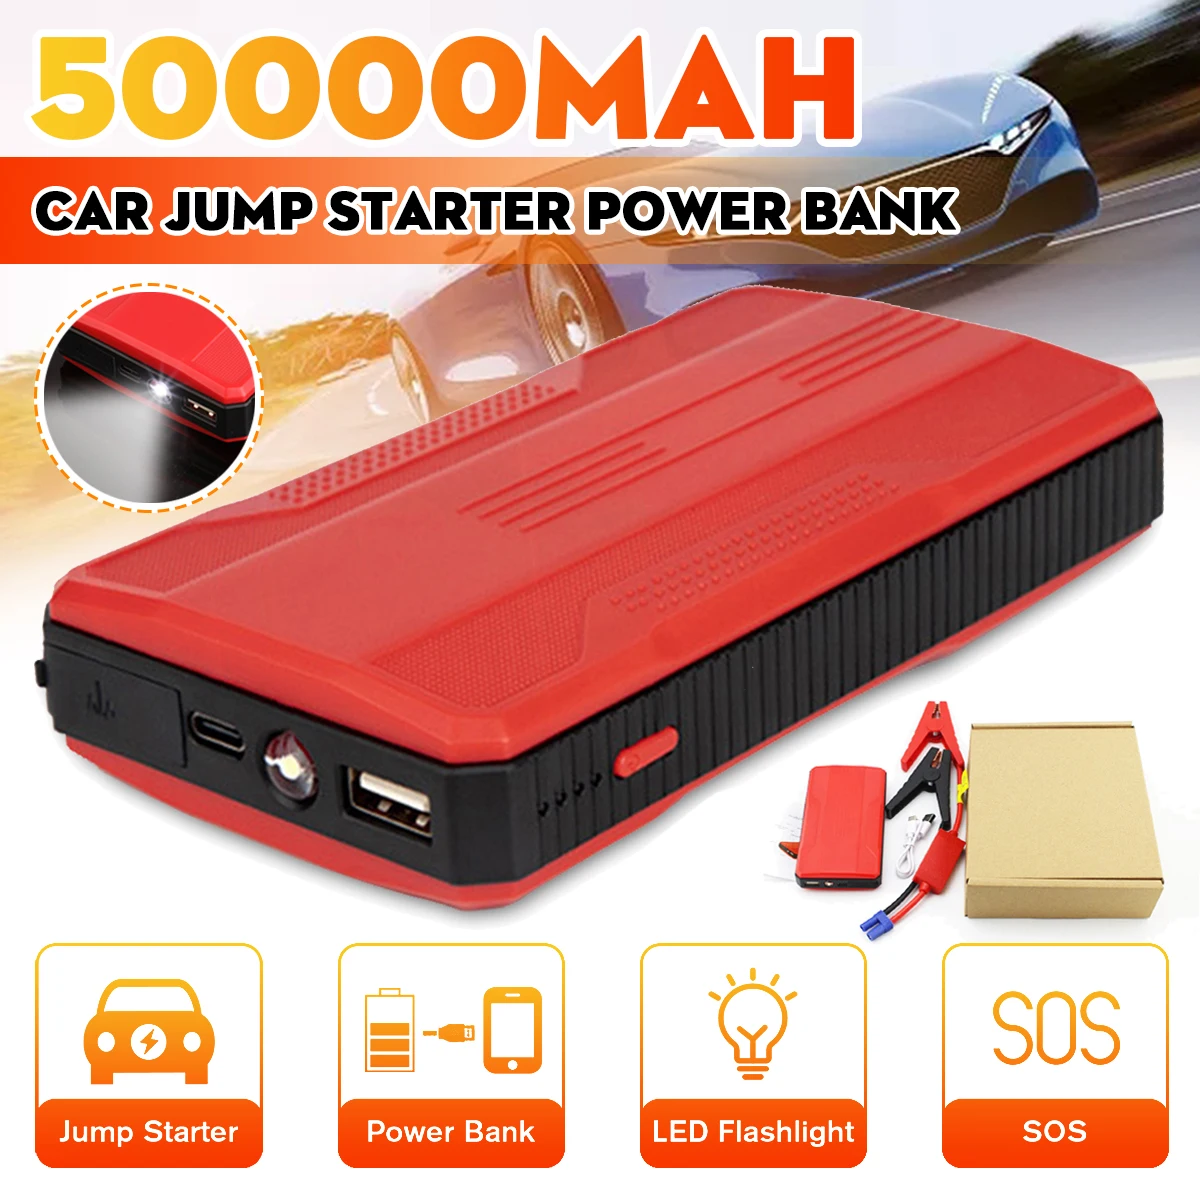 89800mah 600a car jump starter 12v1619v portable emergency starter power bank car booster starting device with led display free global shipping